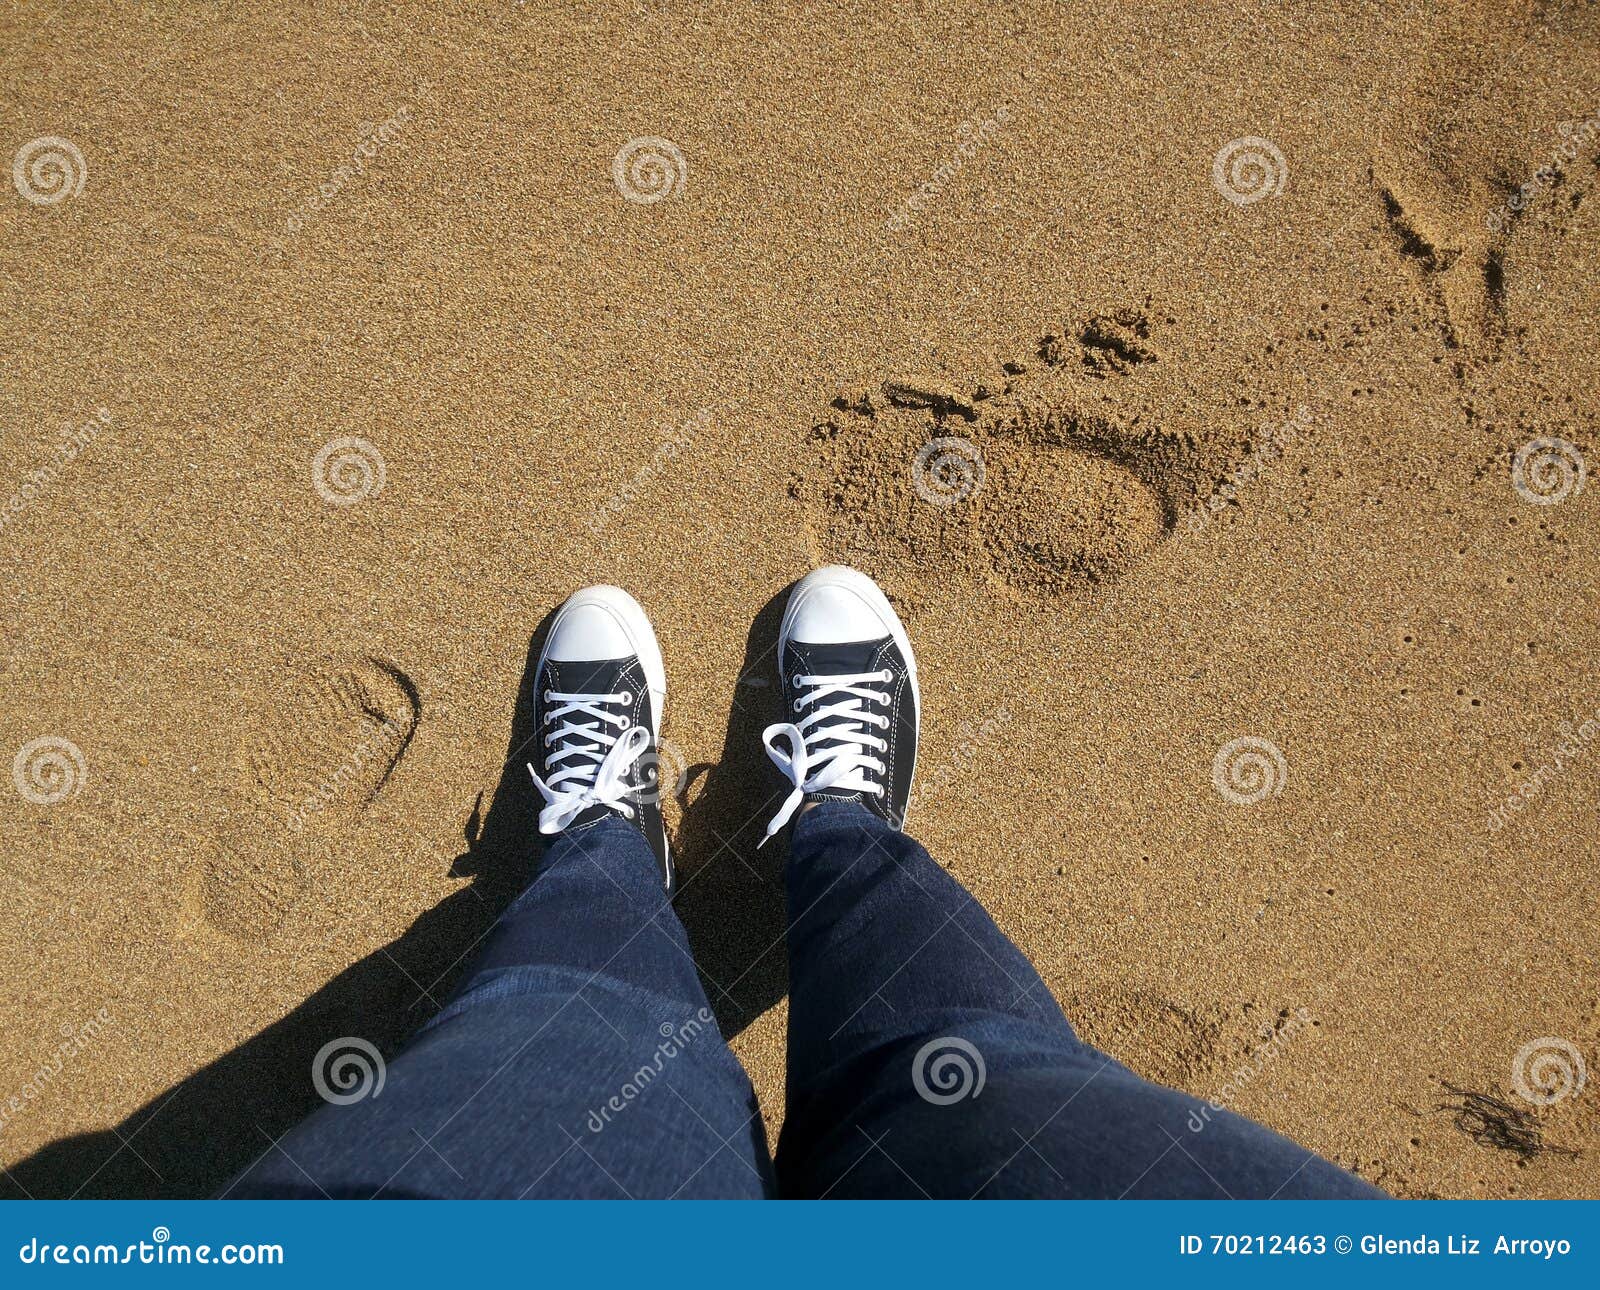 the shoes in the sand